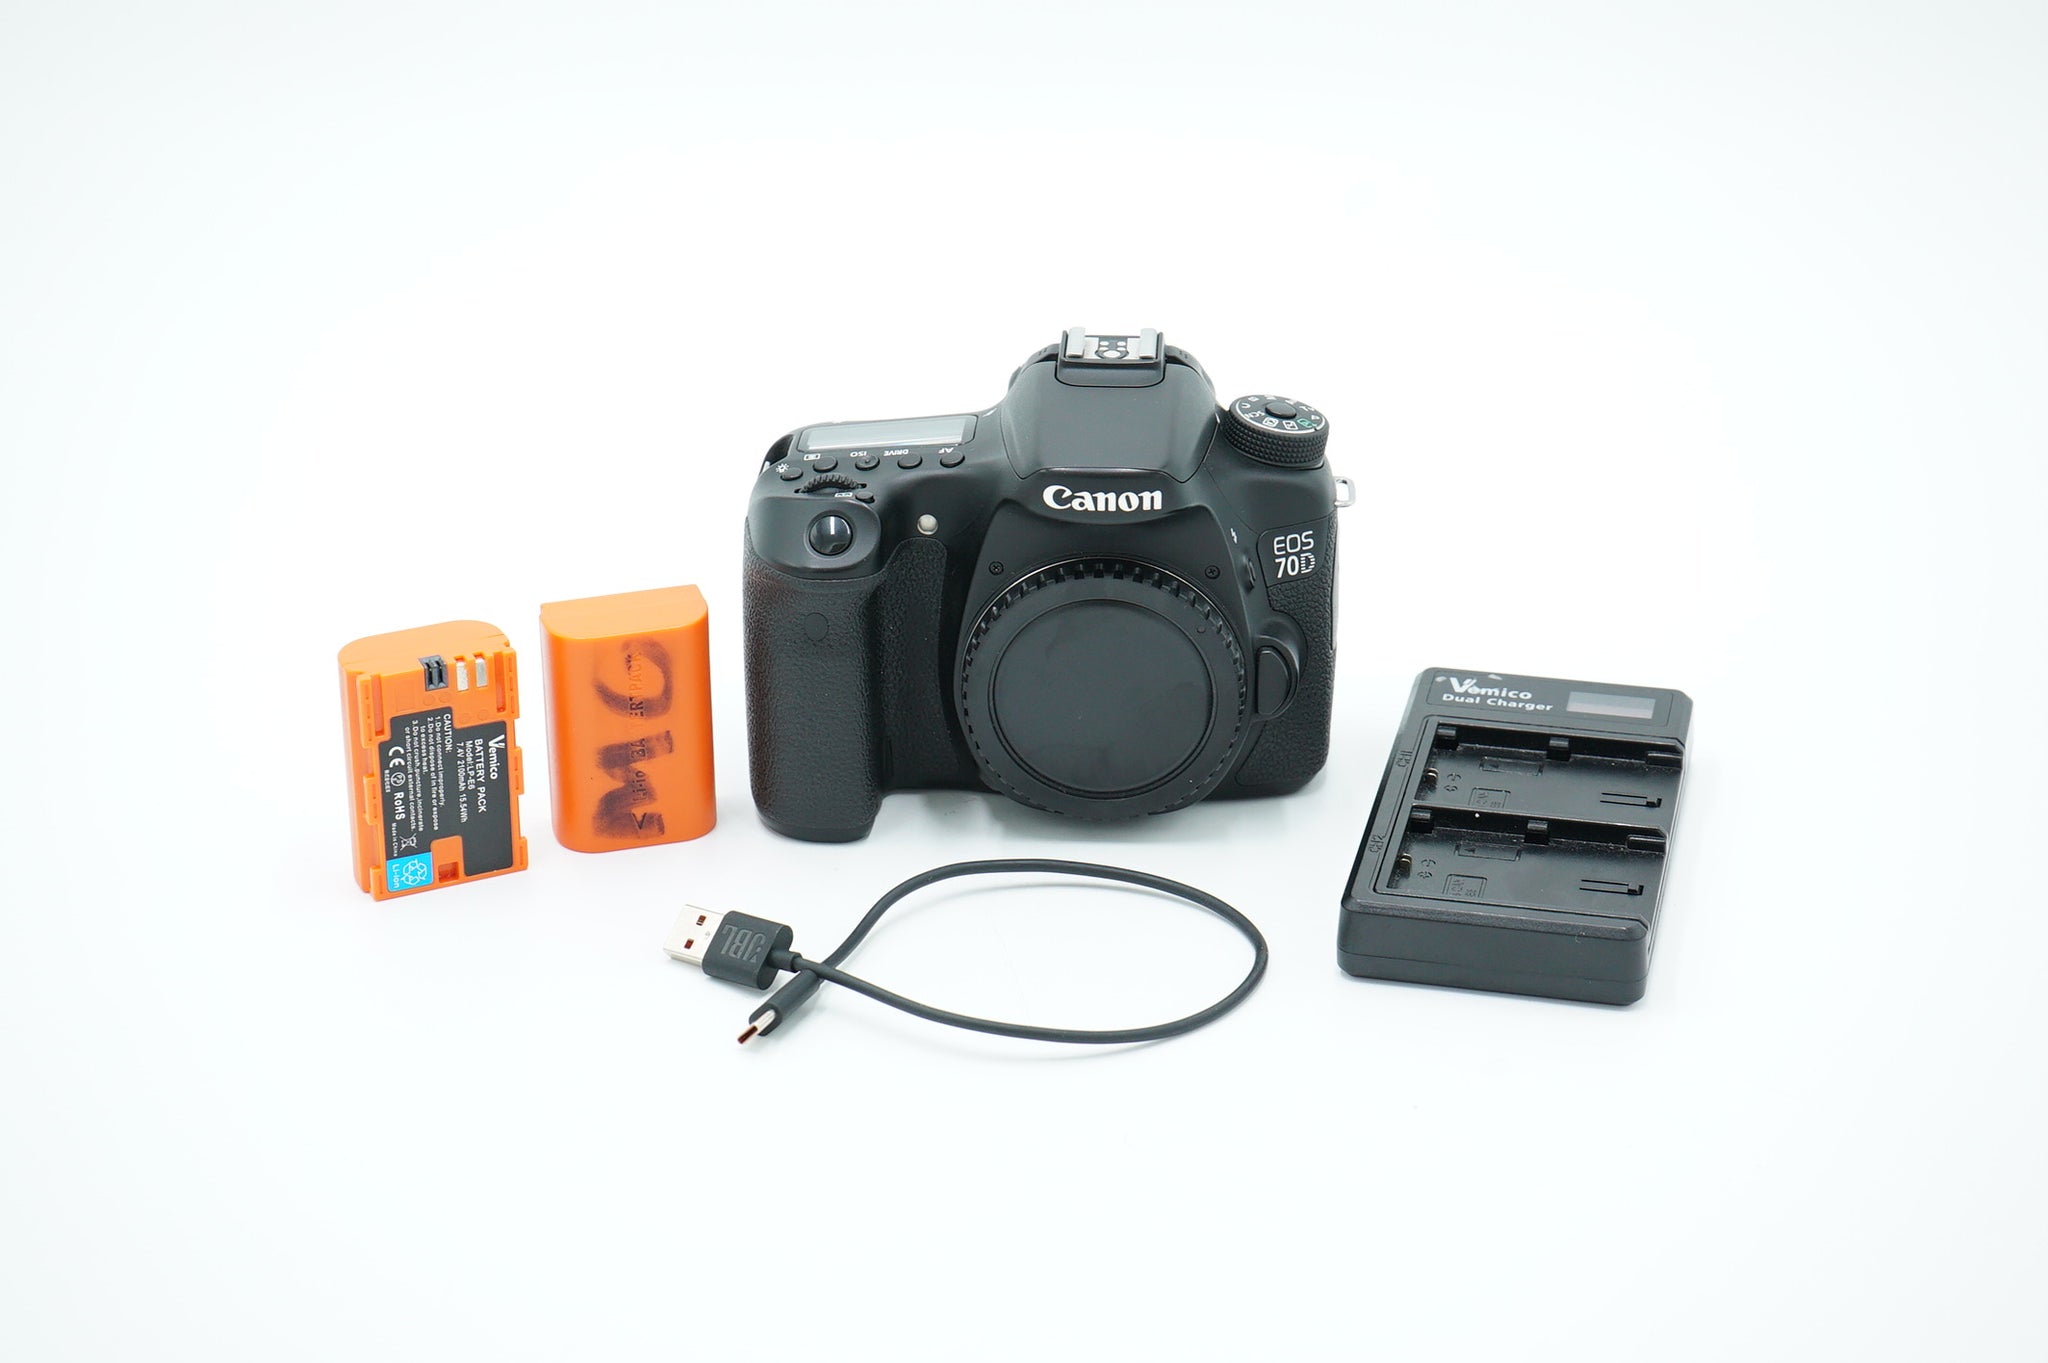 Canon EOS70D/BODY/00445 EOS 70D, Body Only, Used